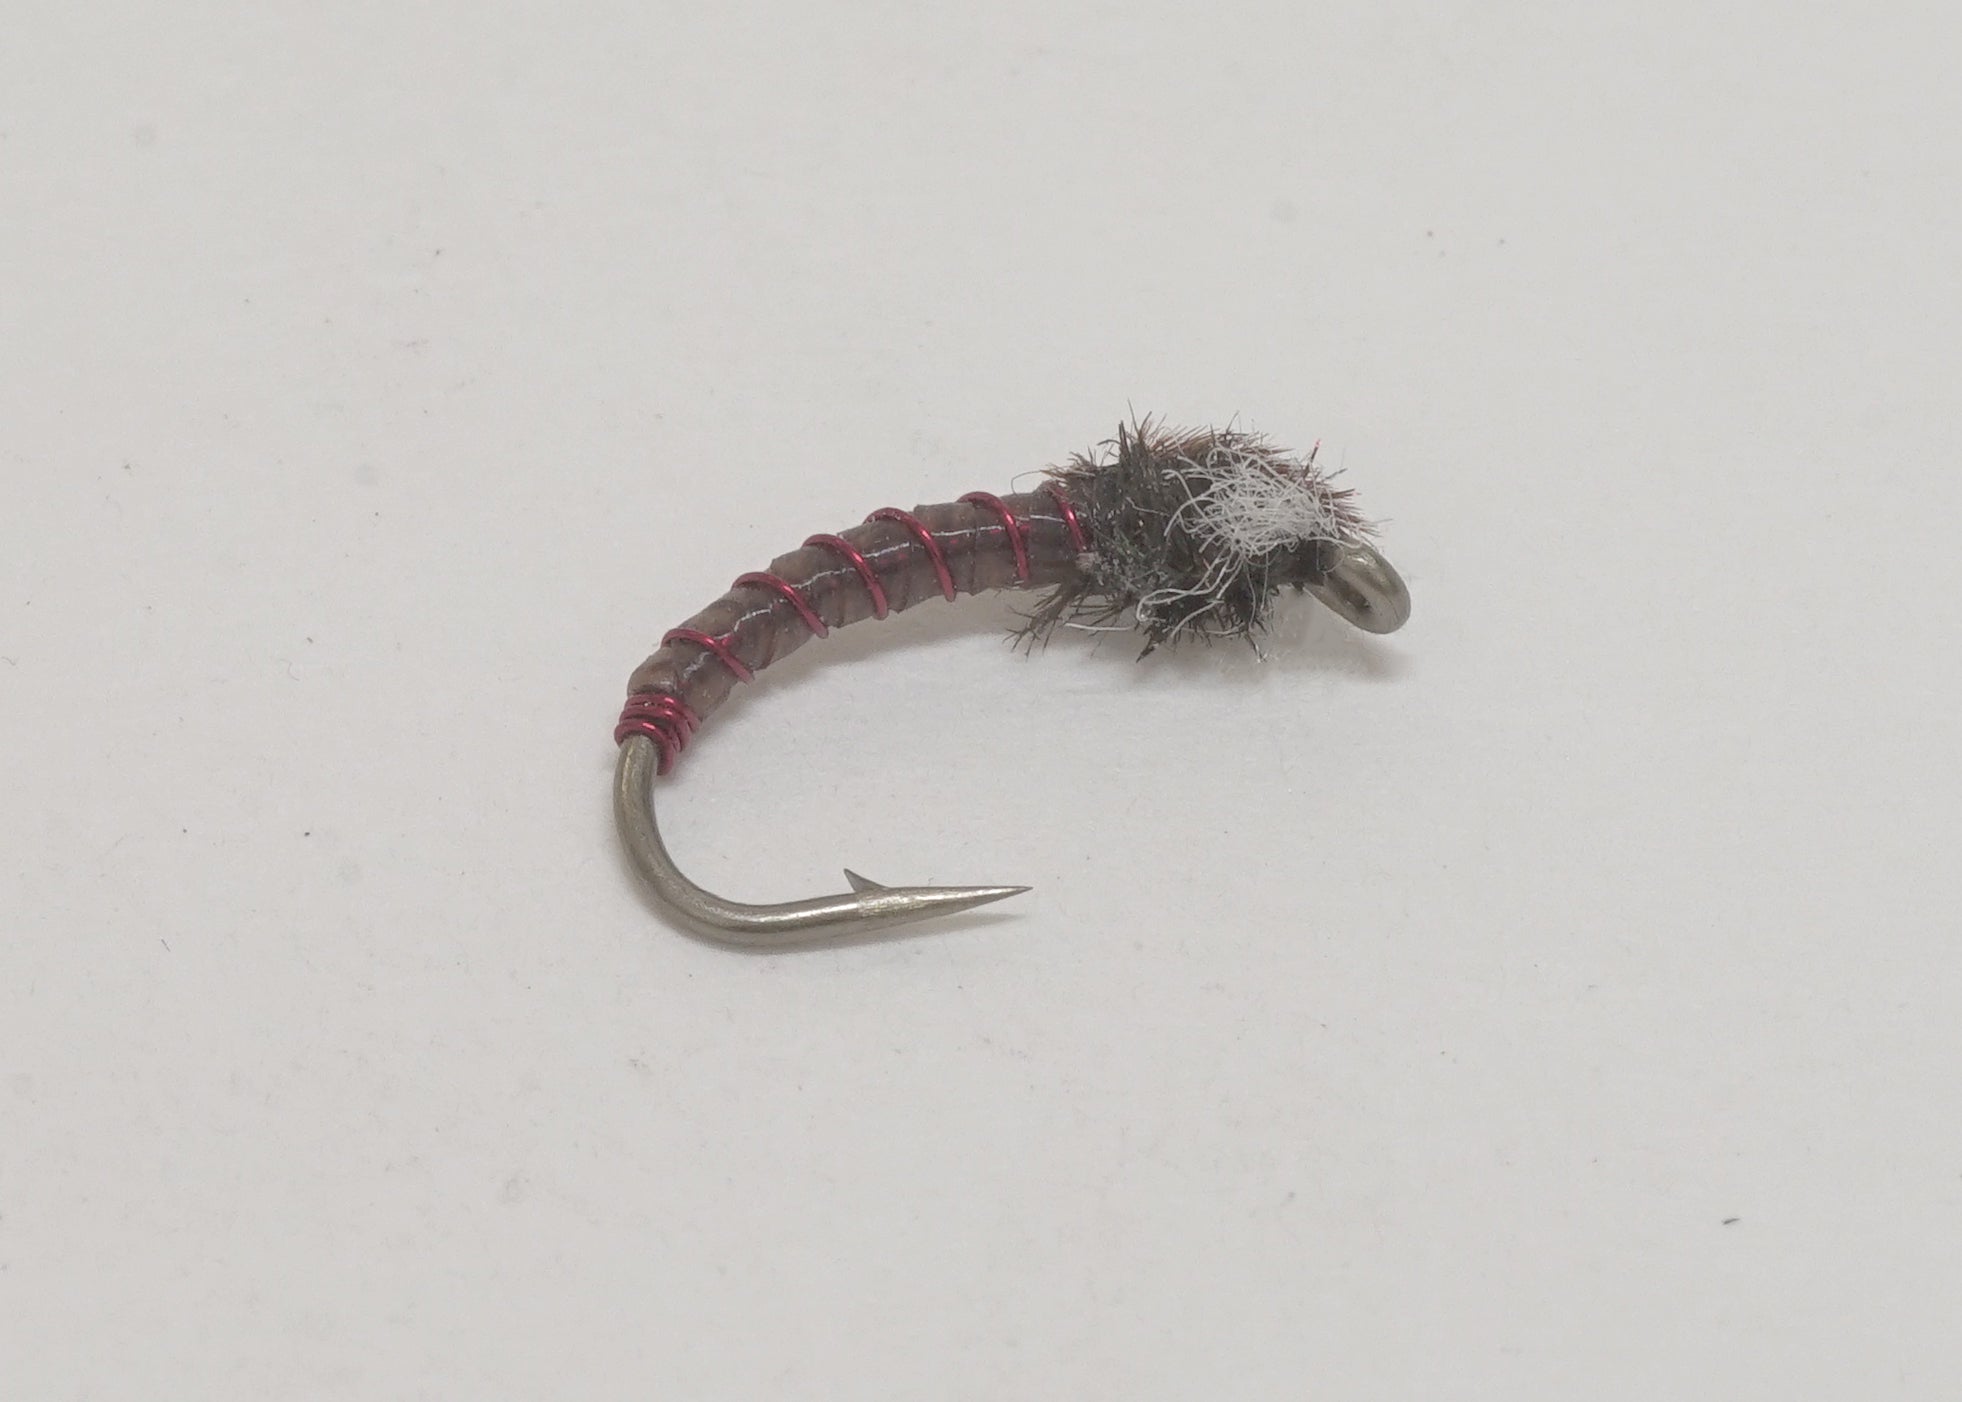 Brian Chan's Red Butt Brown Chironomid Pupa